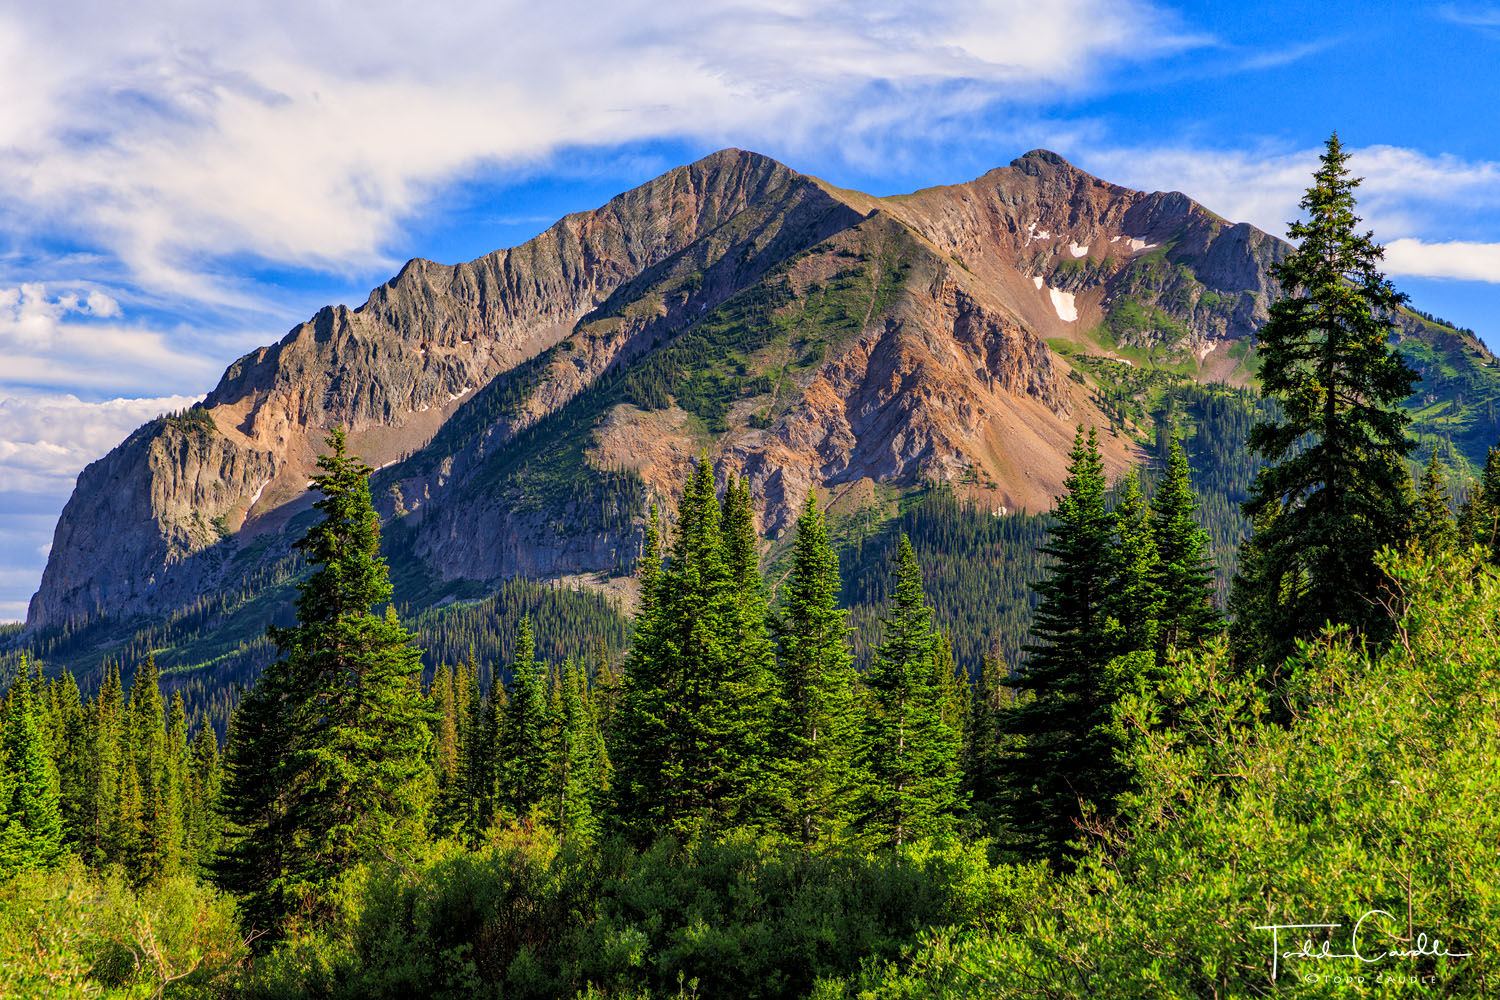 The unusual and dramatic structure of Gothic Mountain rises above the trail to Rustlers Gulch in the Maroon Bells-Snowmass Wilderness...